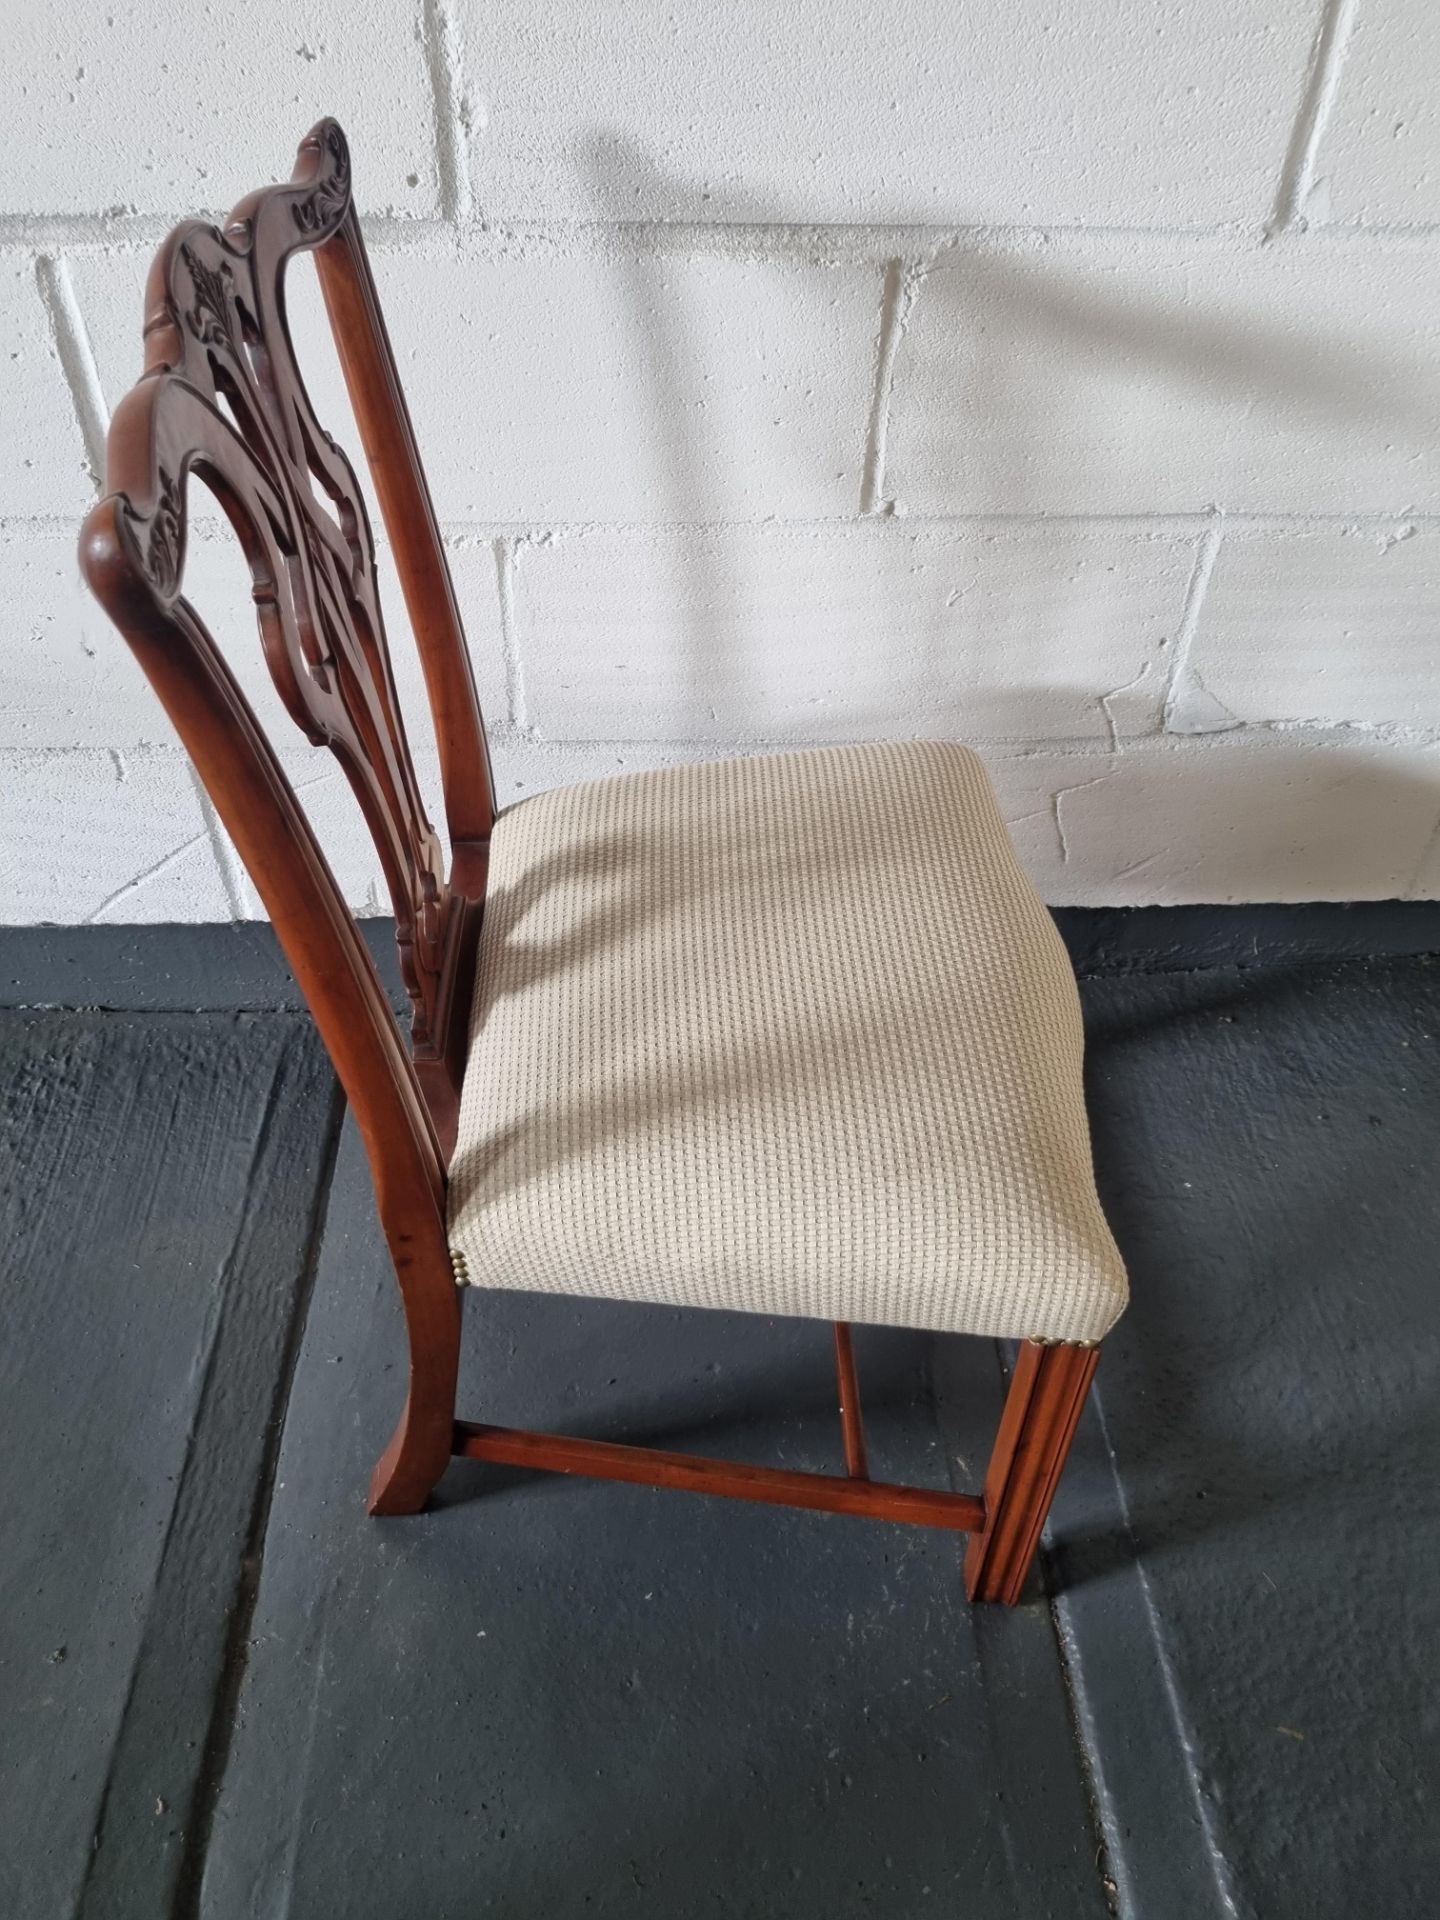 Arthur Brett Georgian-Style Dining Side Chair With Bespoke Cream Upholstery Beautifully Proportioned - Image 5 of 5